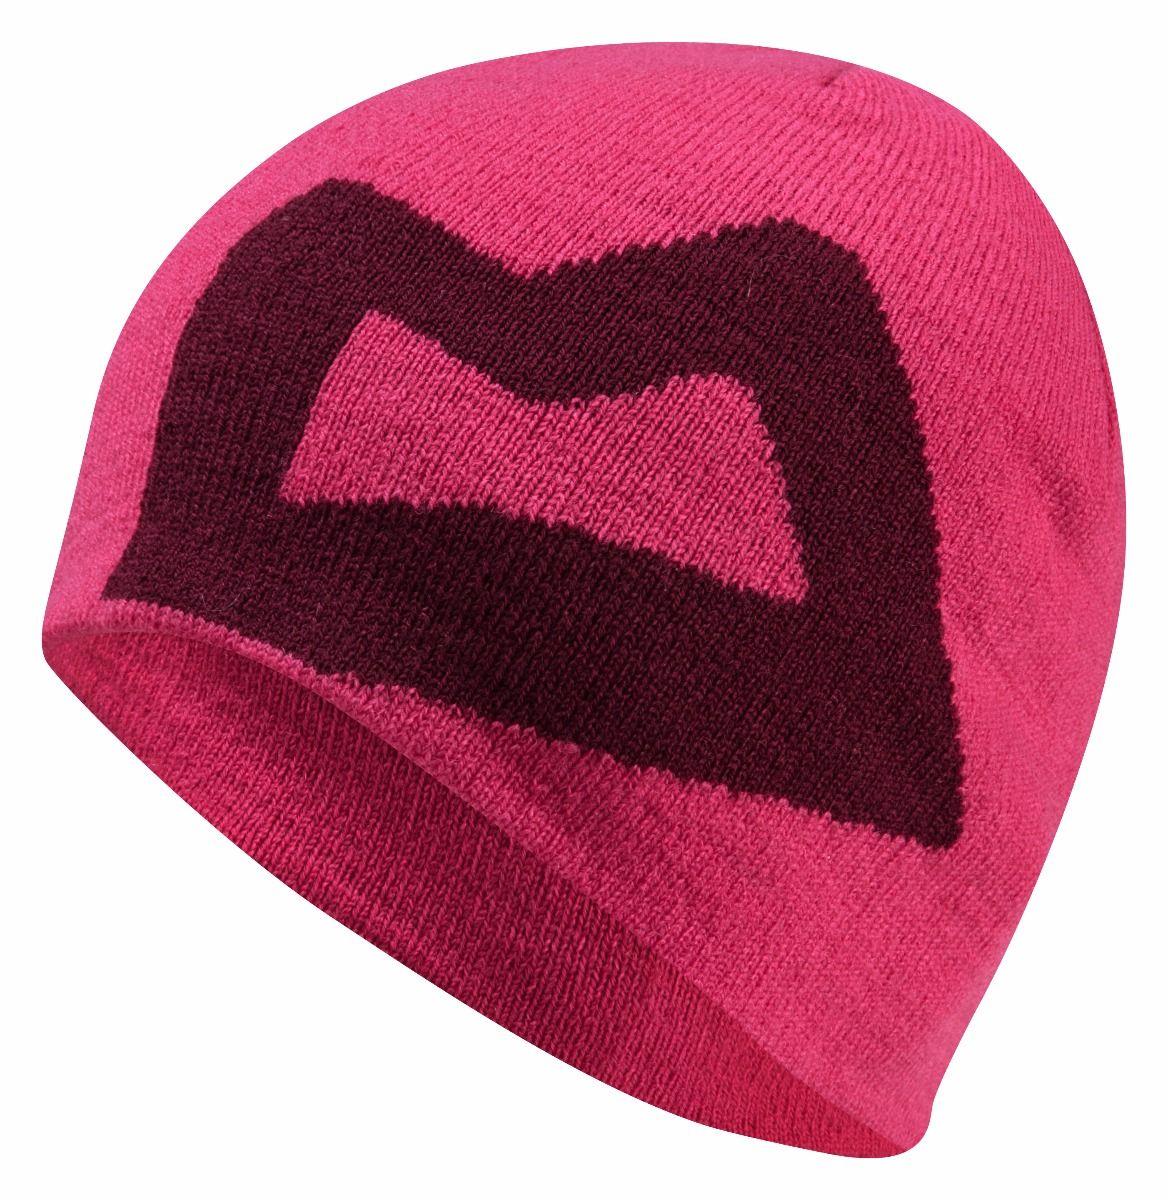 Mountain Equipment Branded Knitted Beanie (VPink/Cranberry)